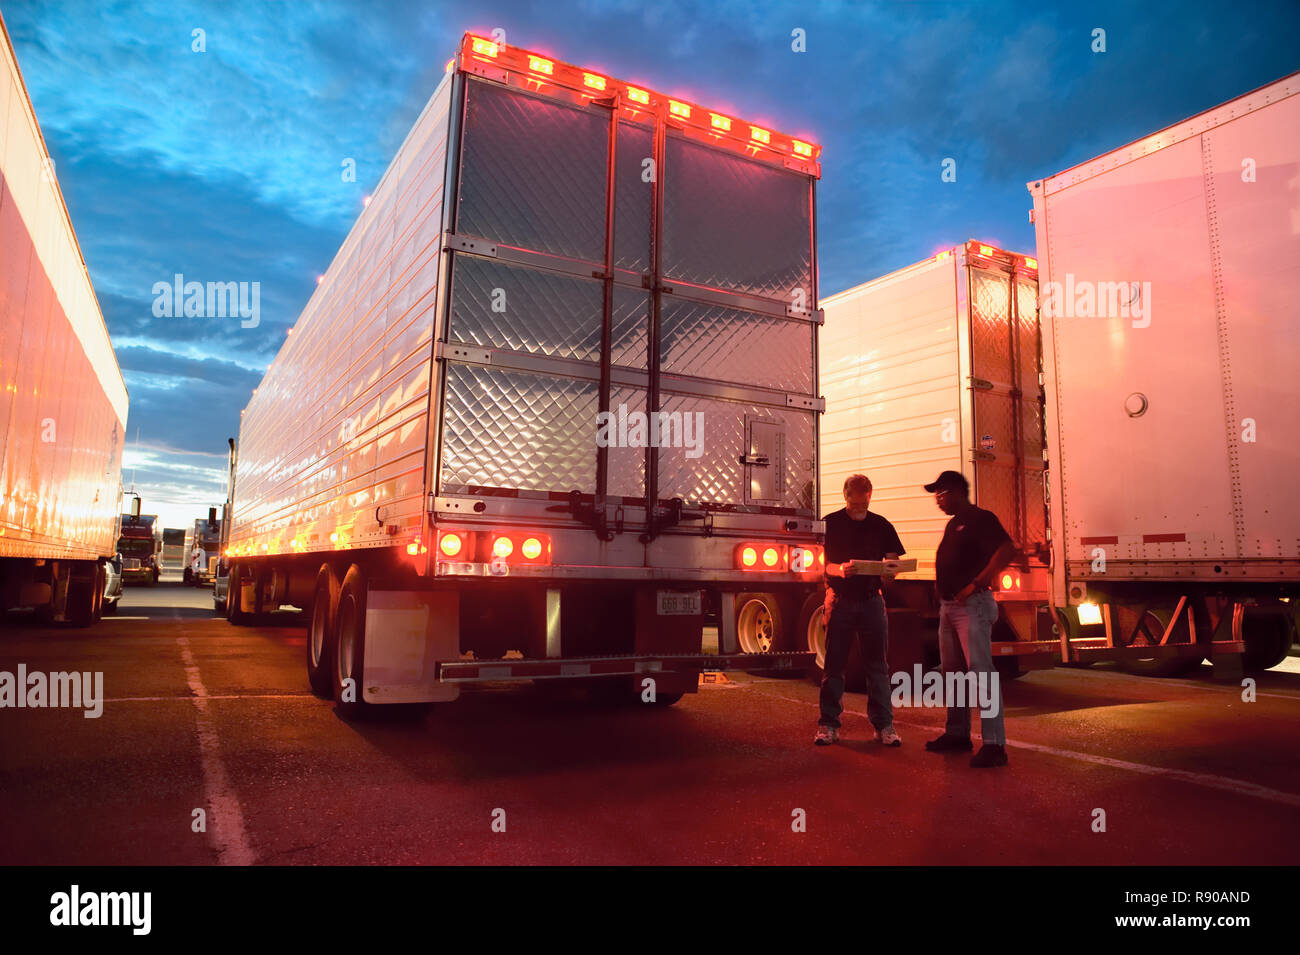 Two truck drives checking dispatch papers while standing next to truck trailers in a large parking lot at night. Stock Photo